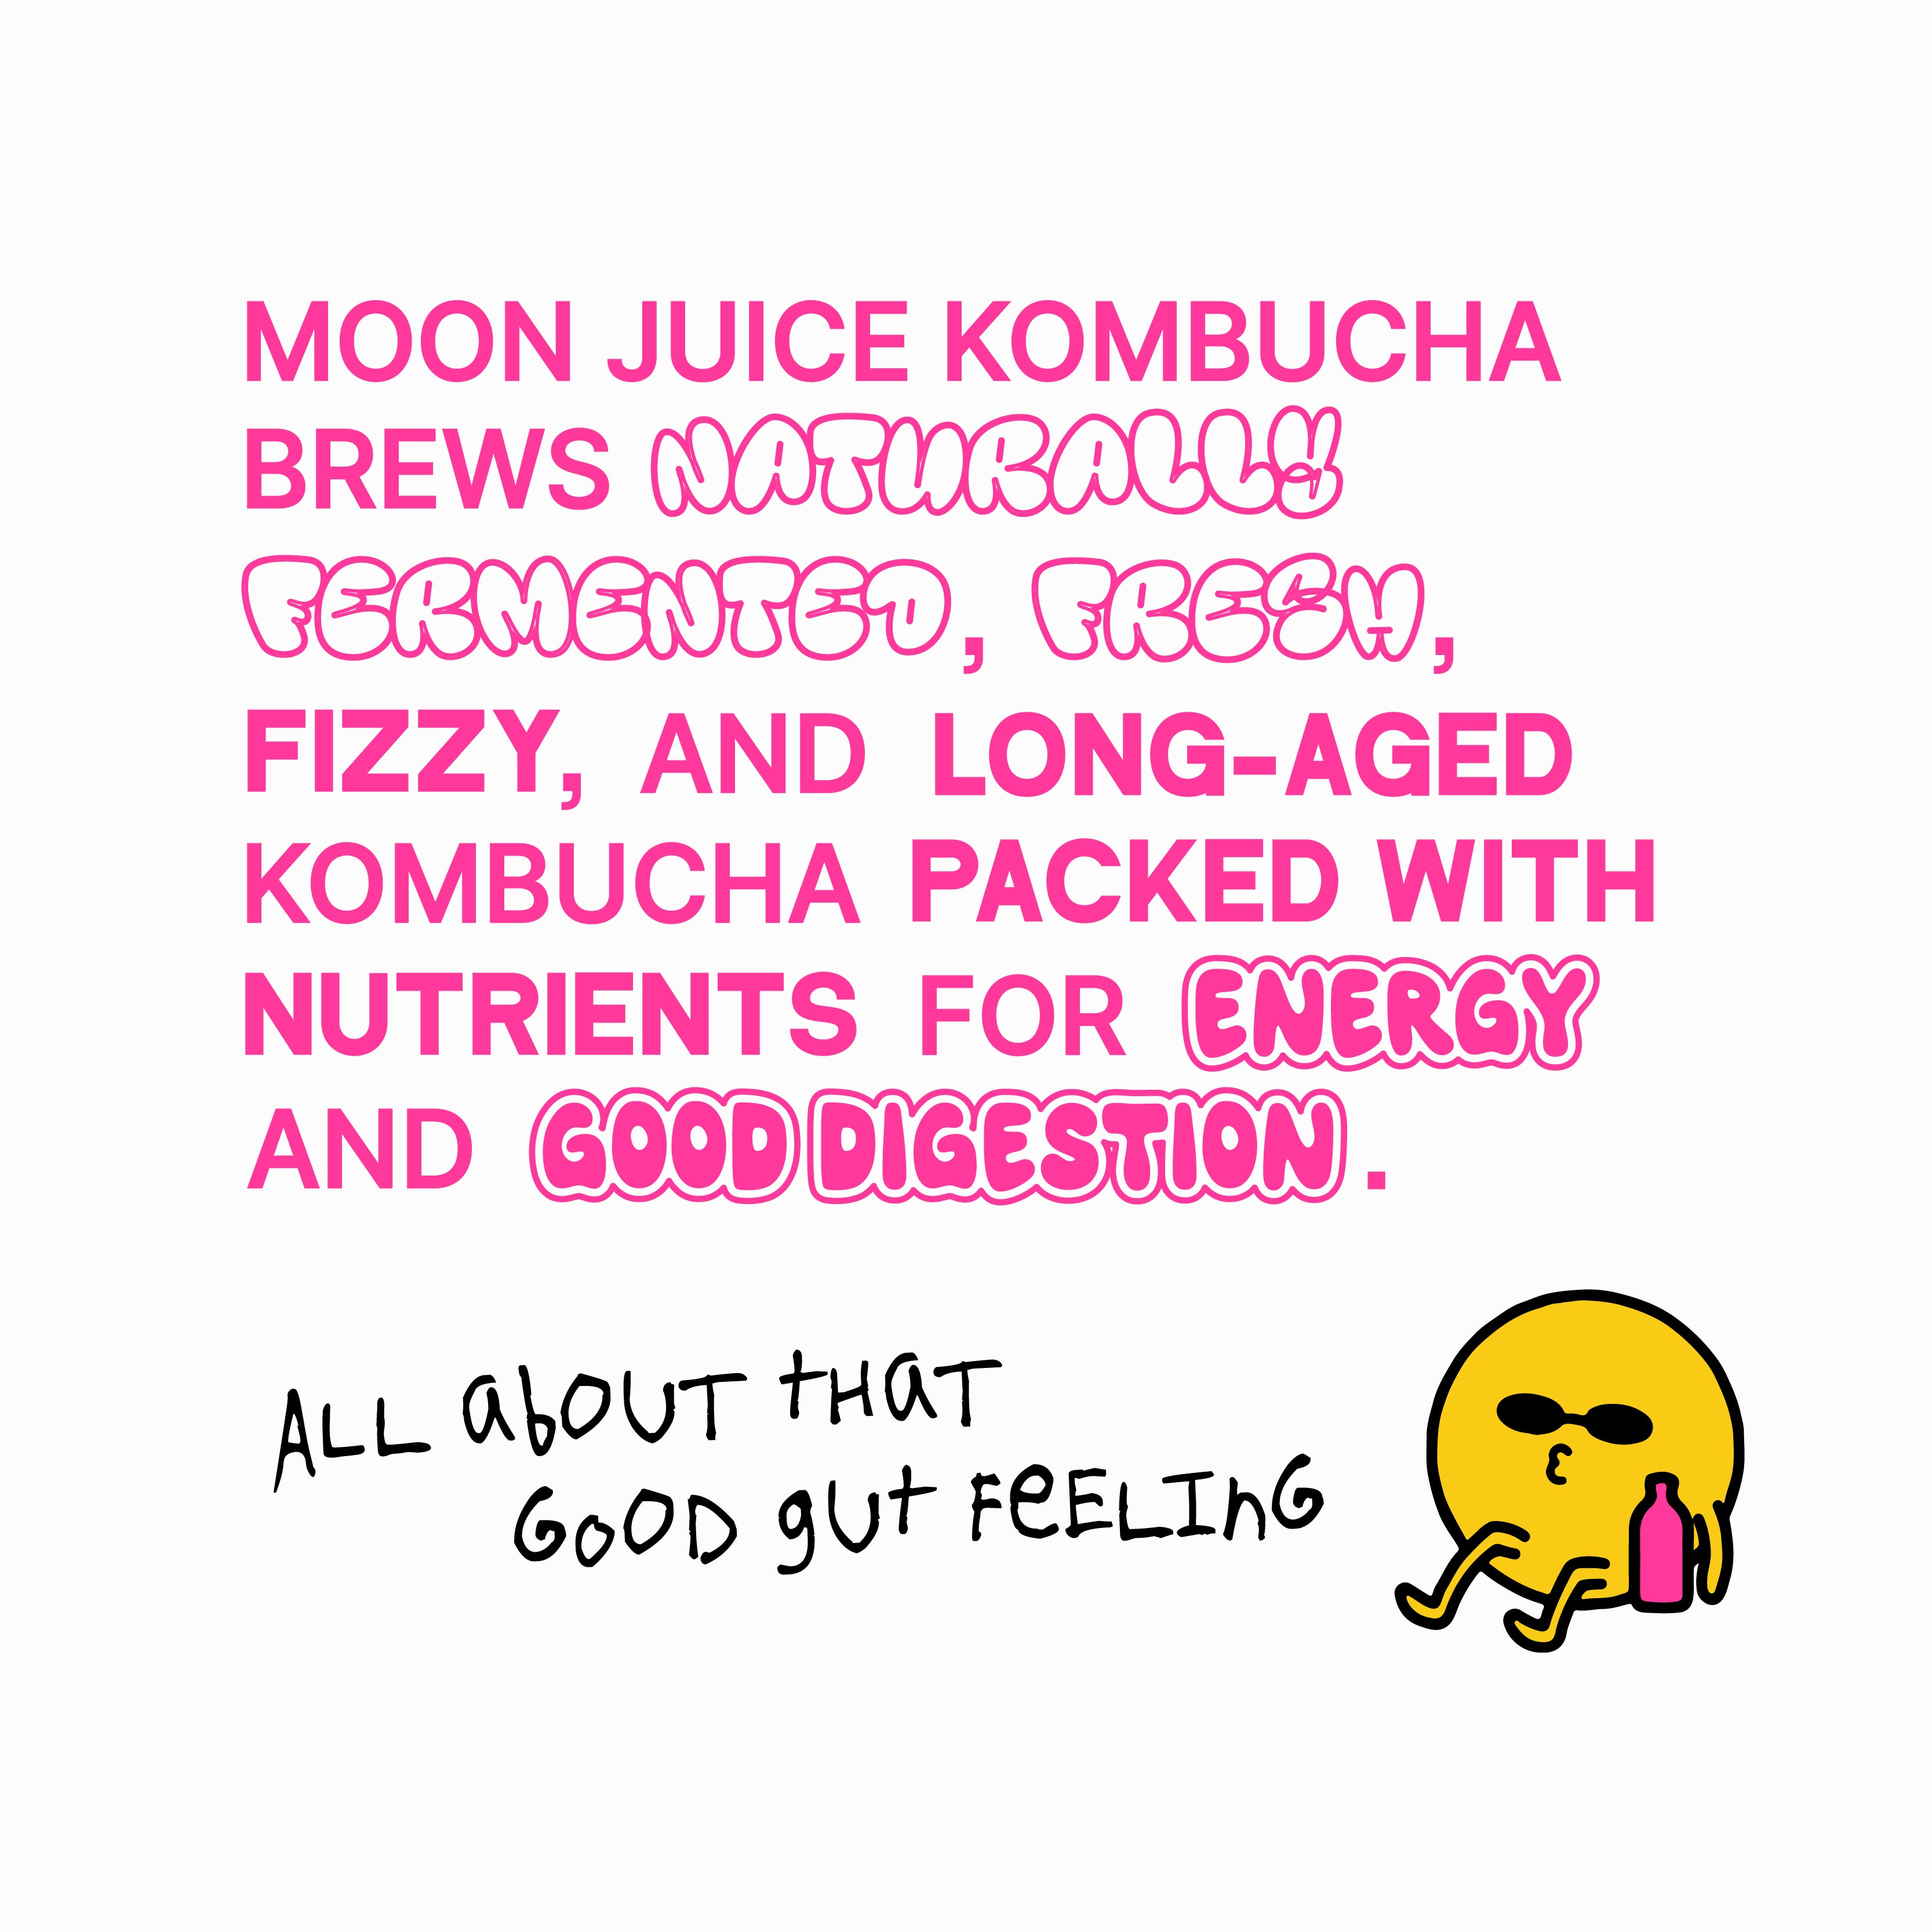 Moon Juice Kombucha brews naturally fermented, fresh, fizzy and long-aged Kombucha packed with nutrients for energy and good digestion. All about that good gut feeling. Image of Moon Guy with Sunglasses